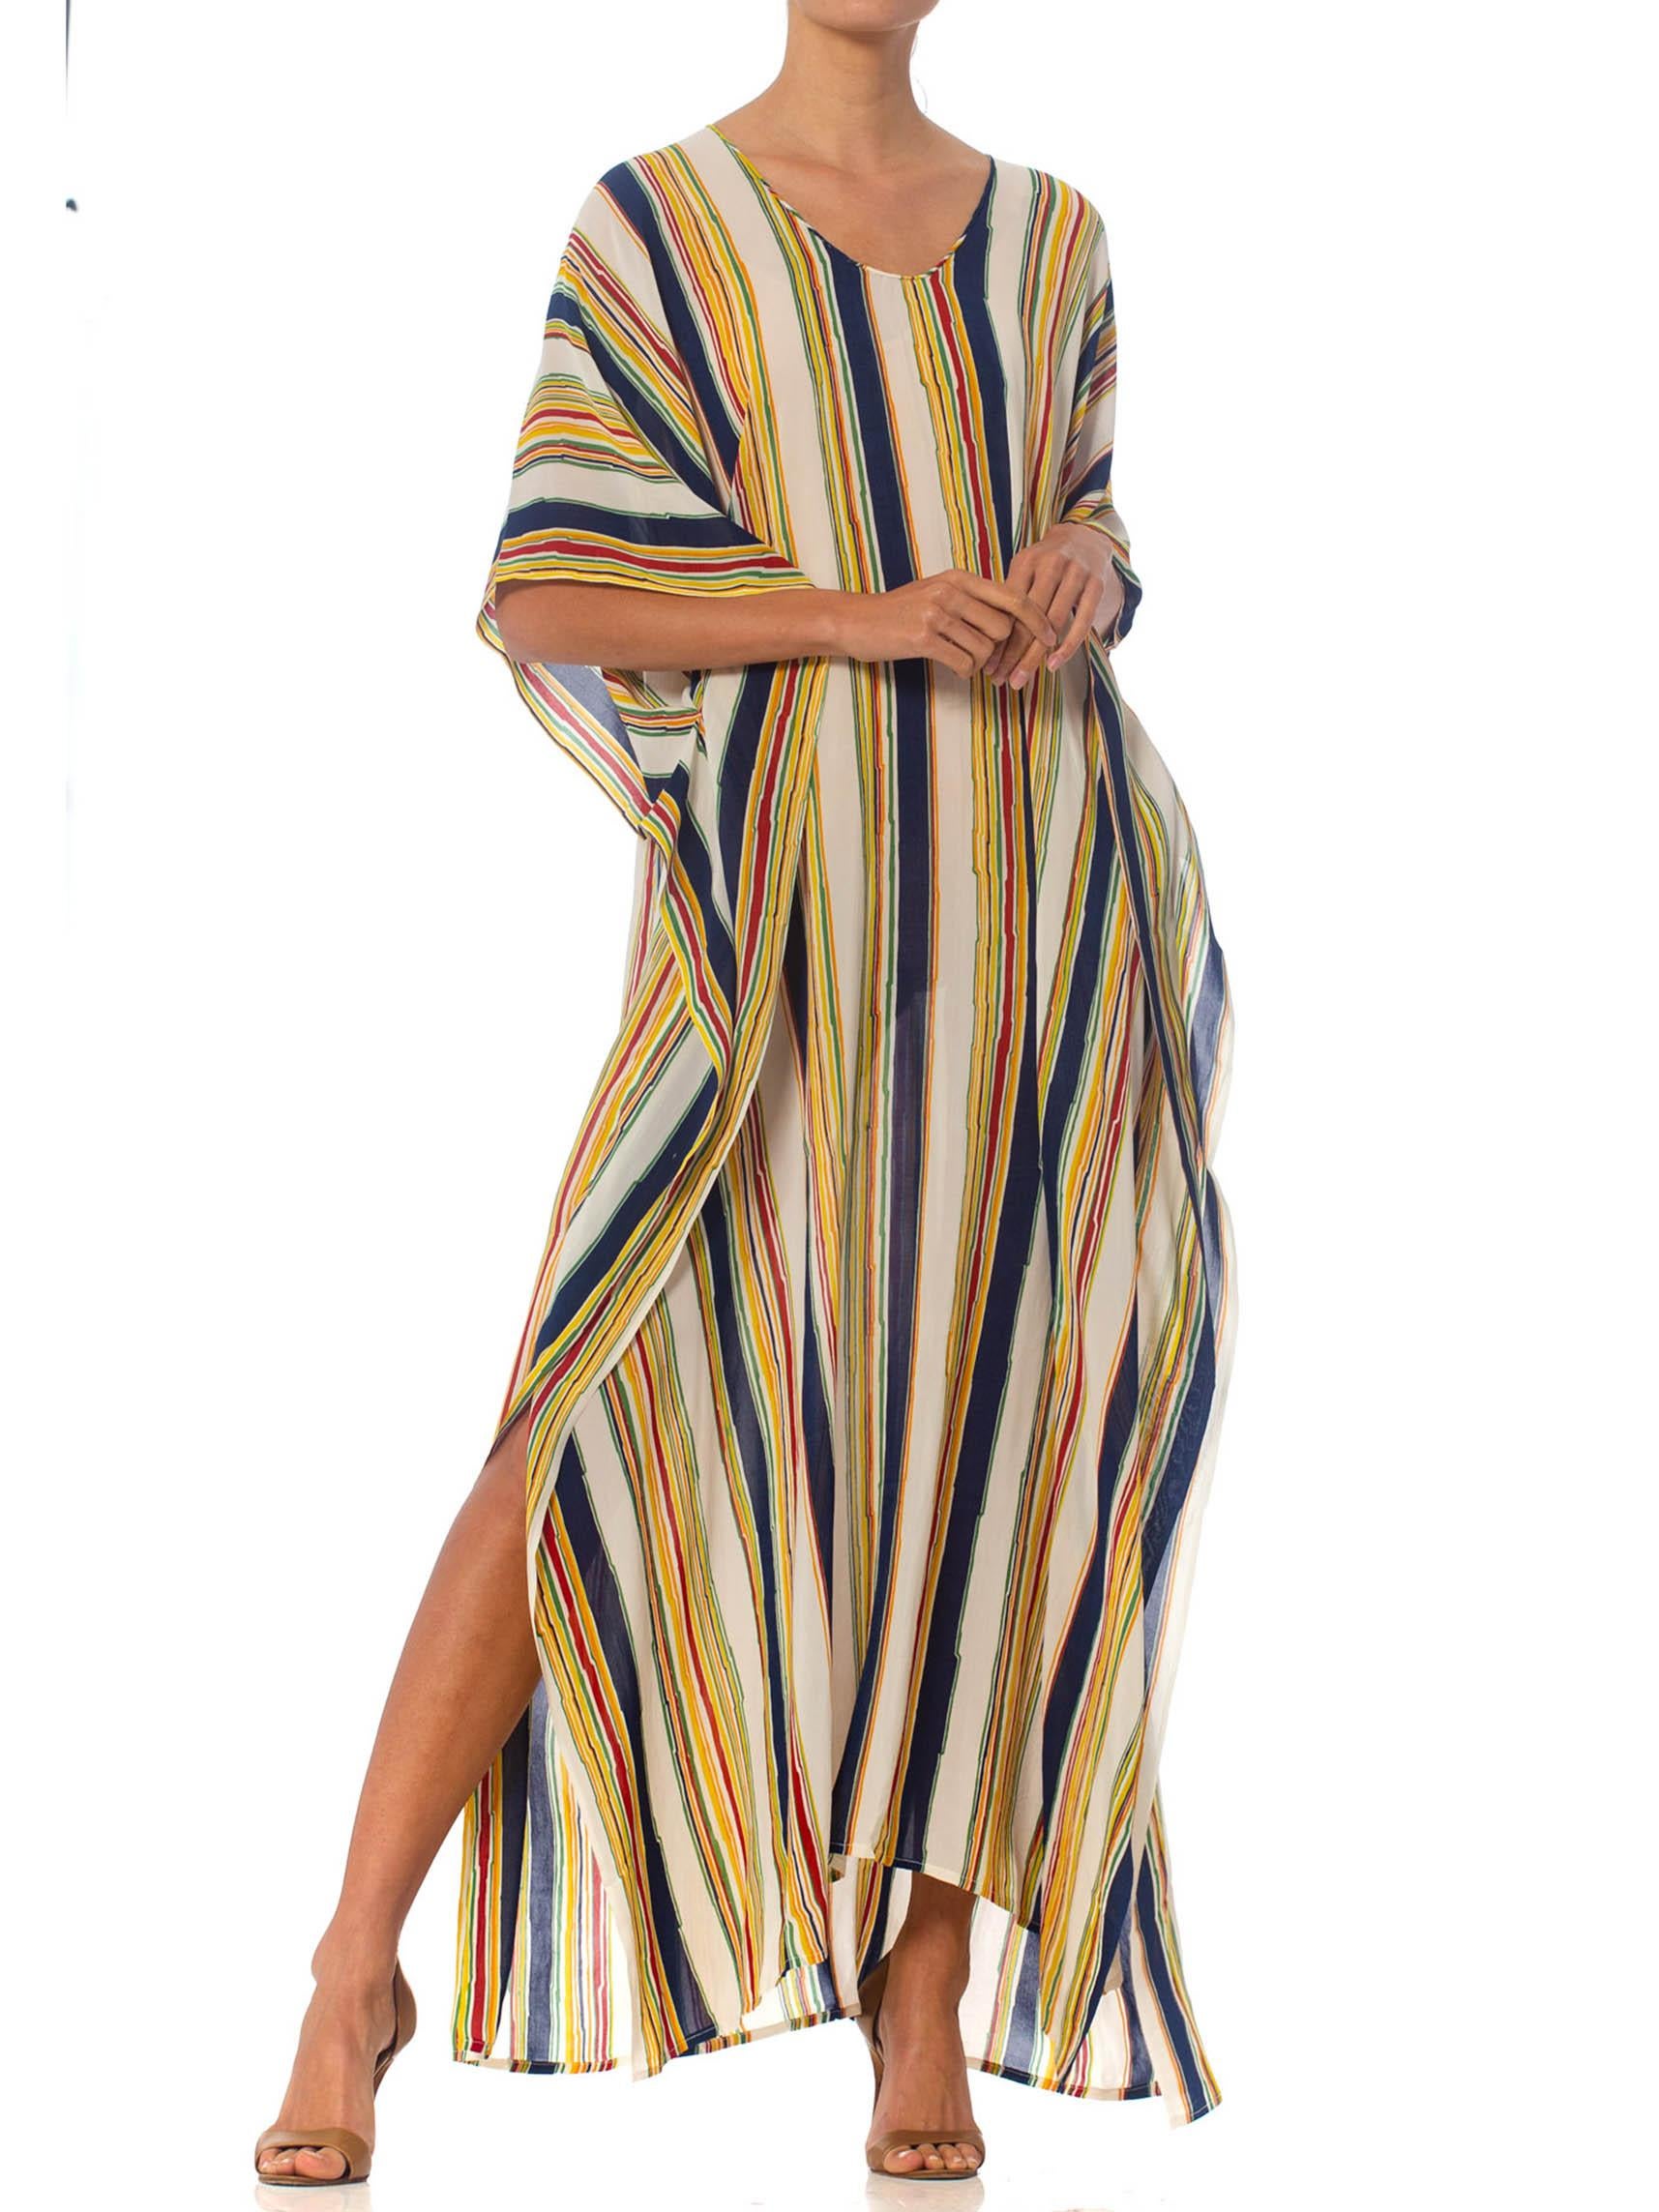 MORPHEW COLLECTION Silk Crepe De Chine Kaftan Made From Vintage 70S Striped Fabric